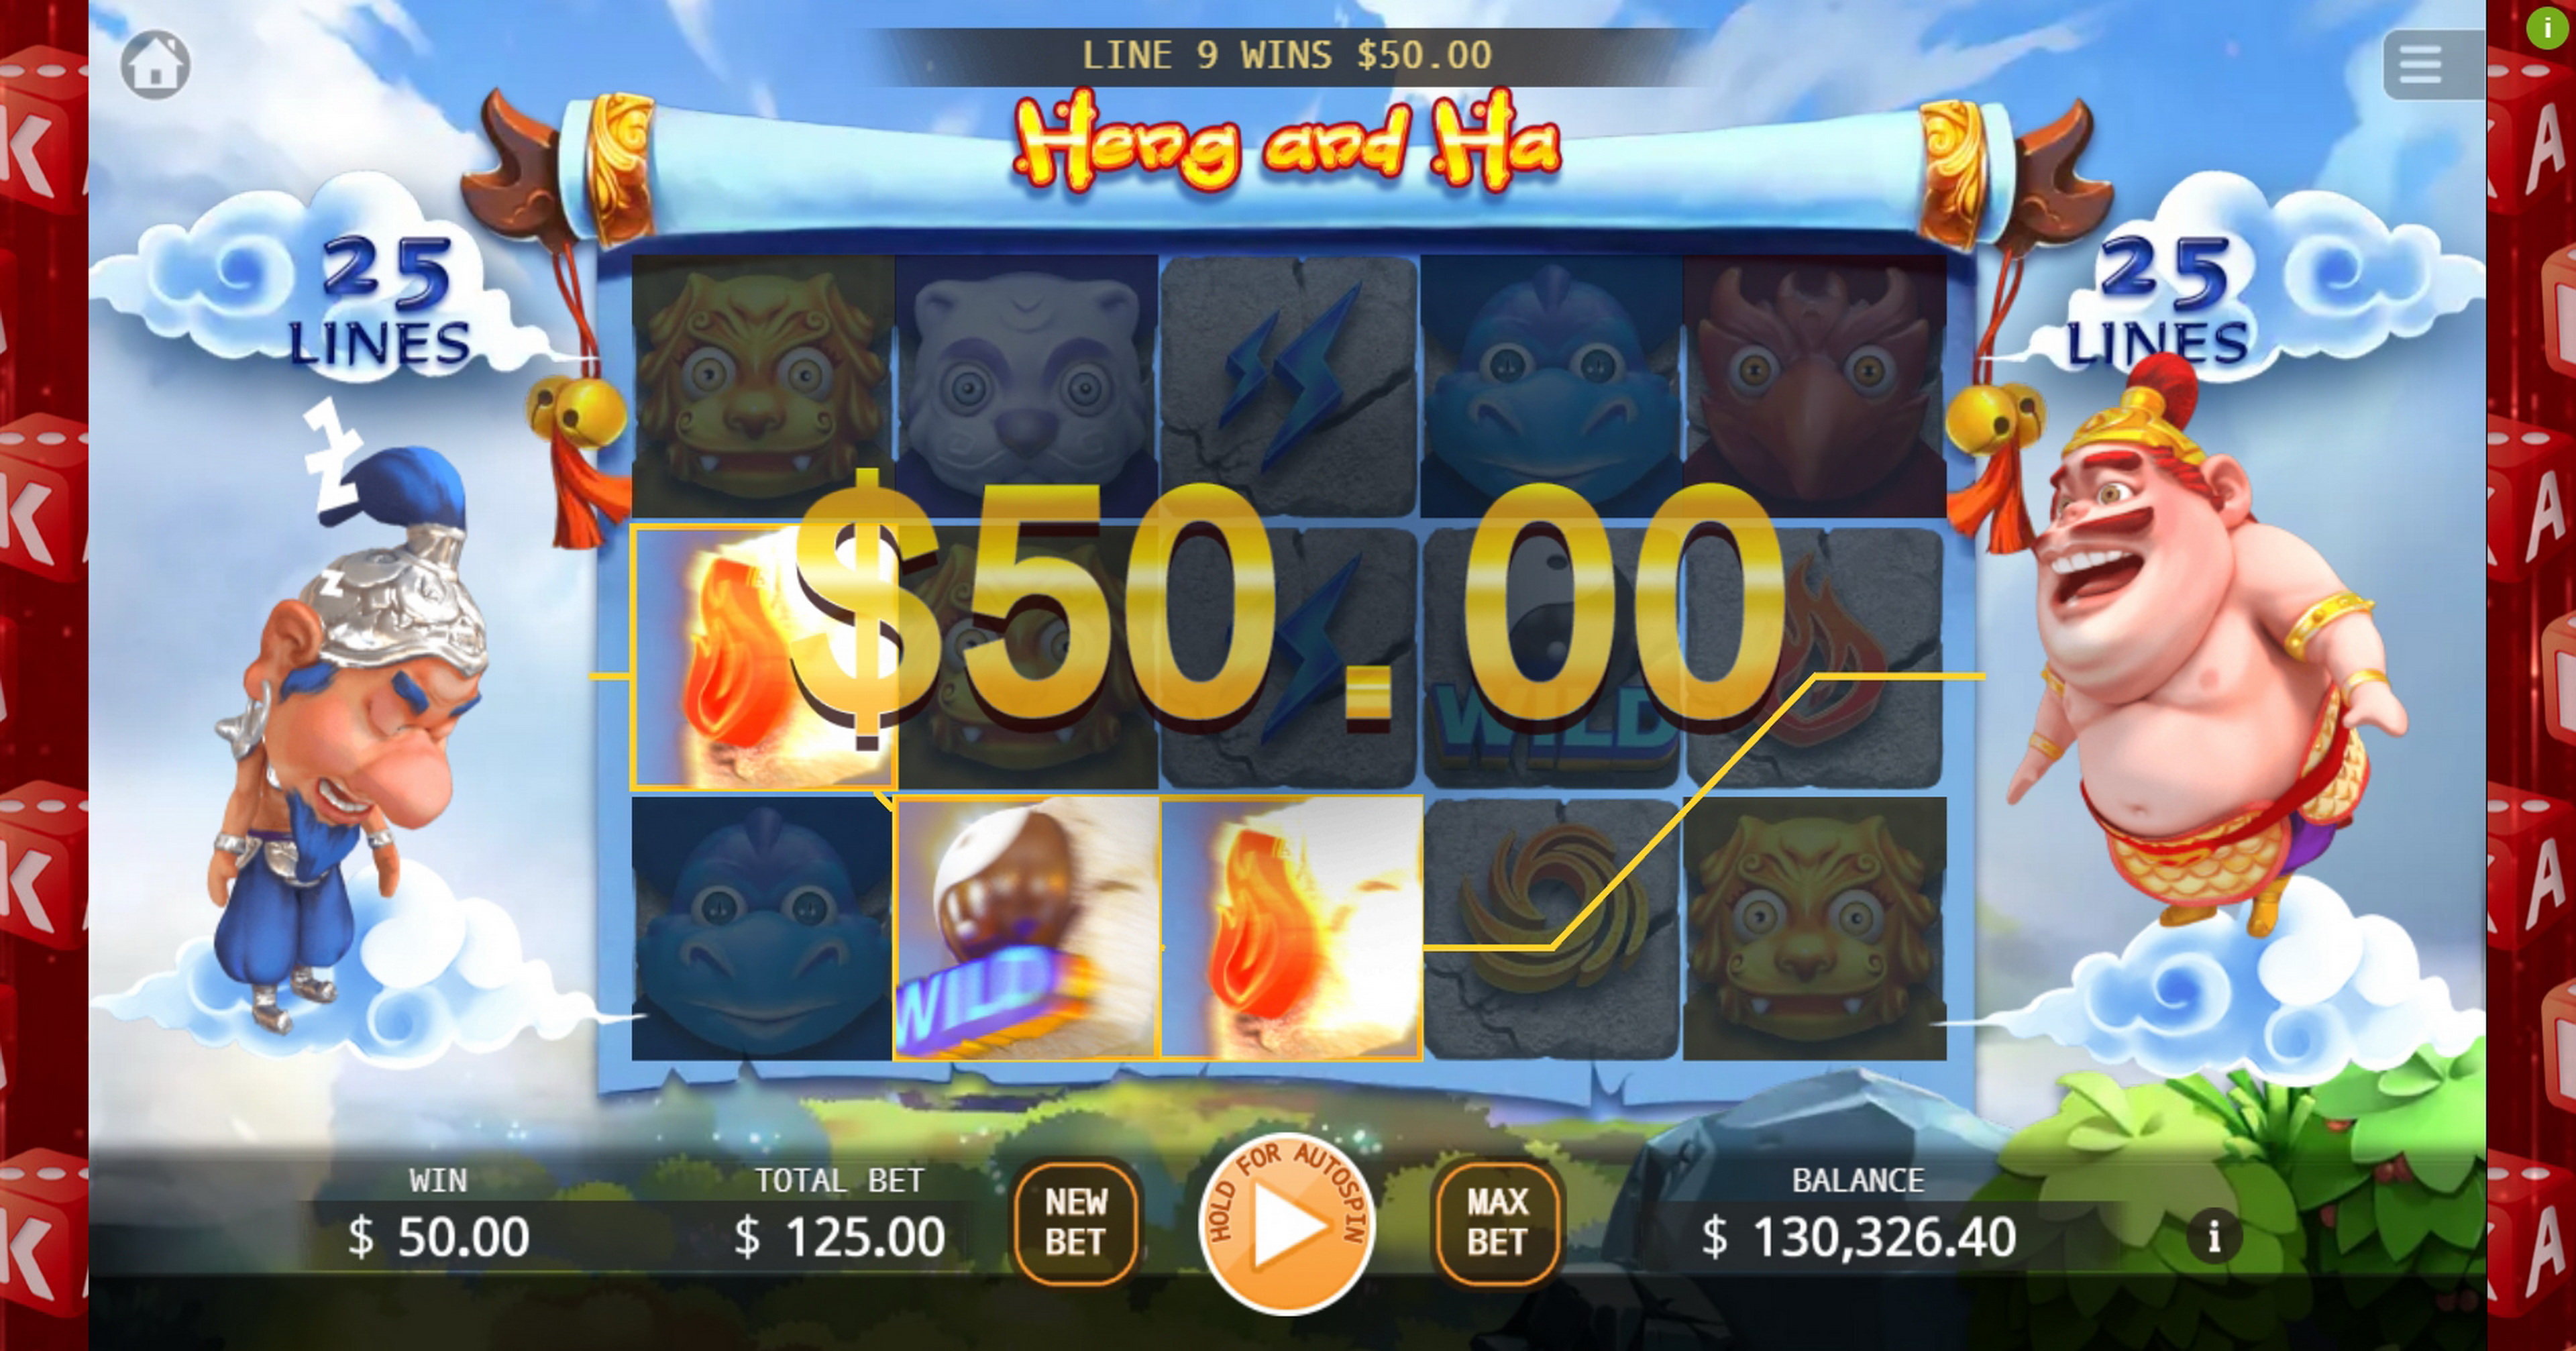 Win Money in Heng and Ha Free Slot Game by KA Gaming